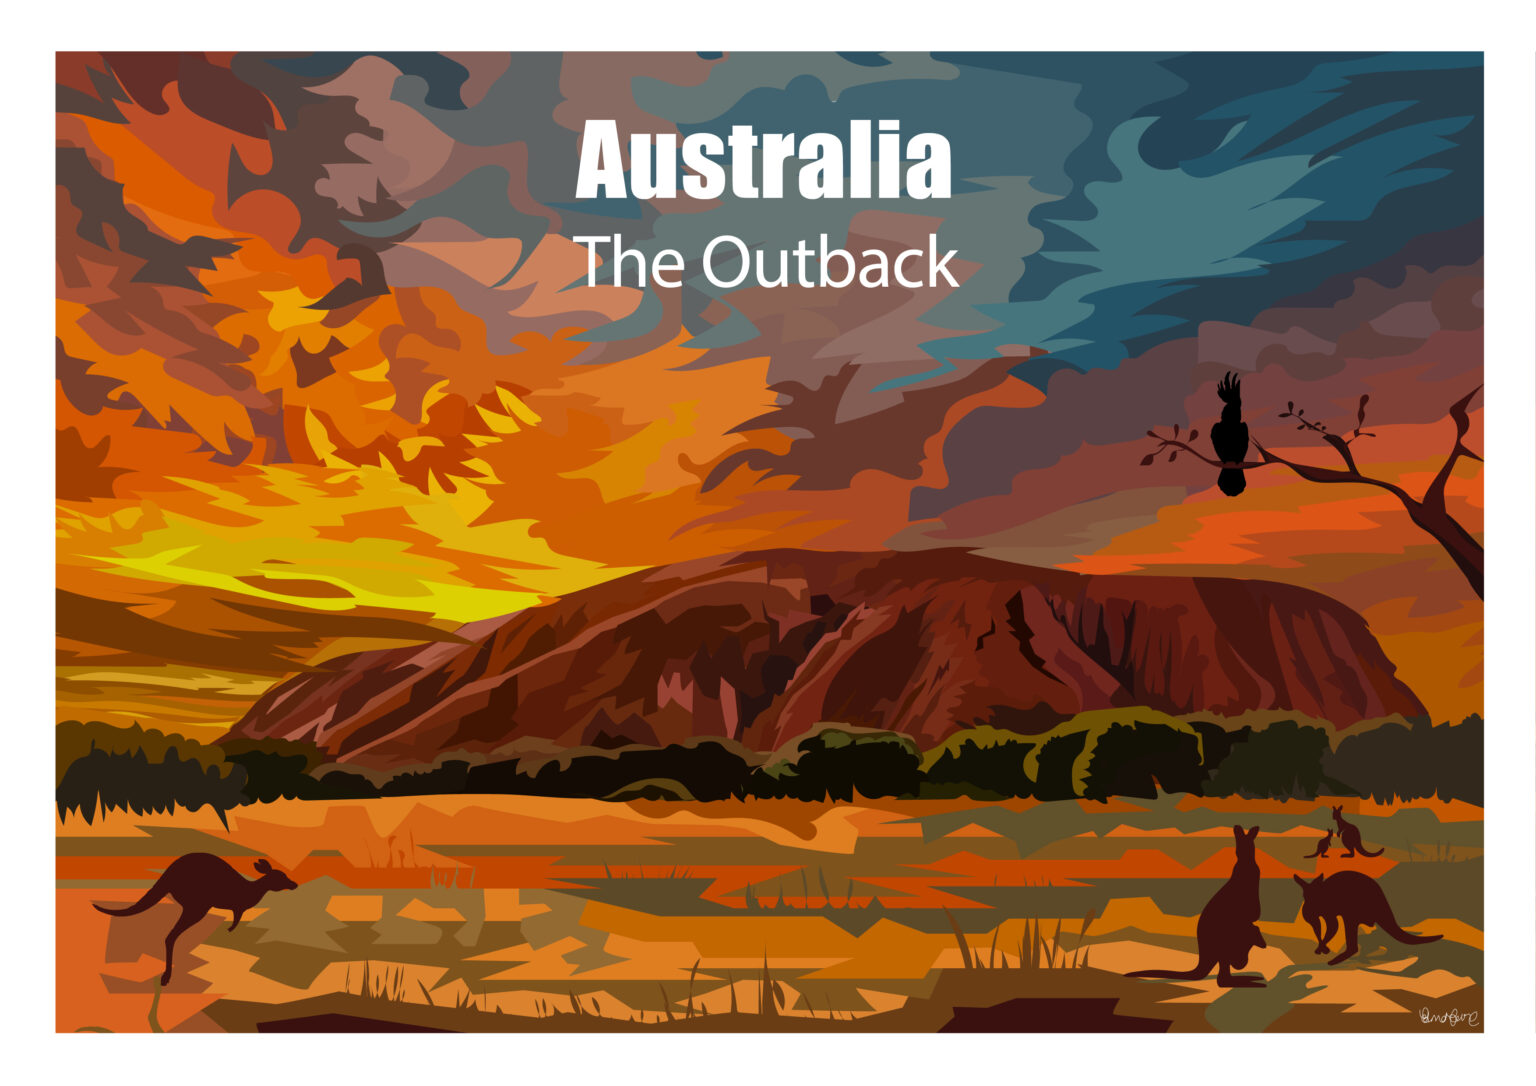 Australia Art Print (The Outback) Ed Lewis Art and Design Buy now